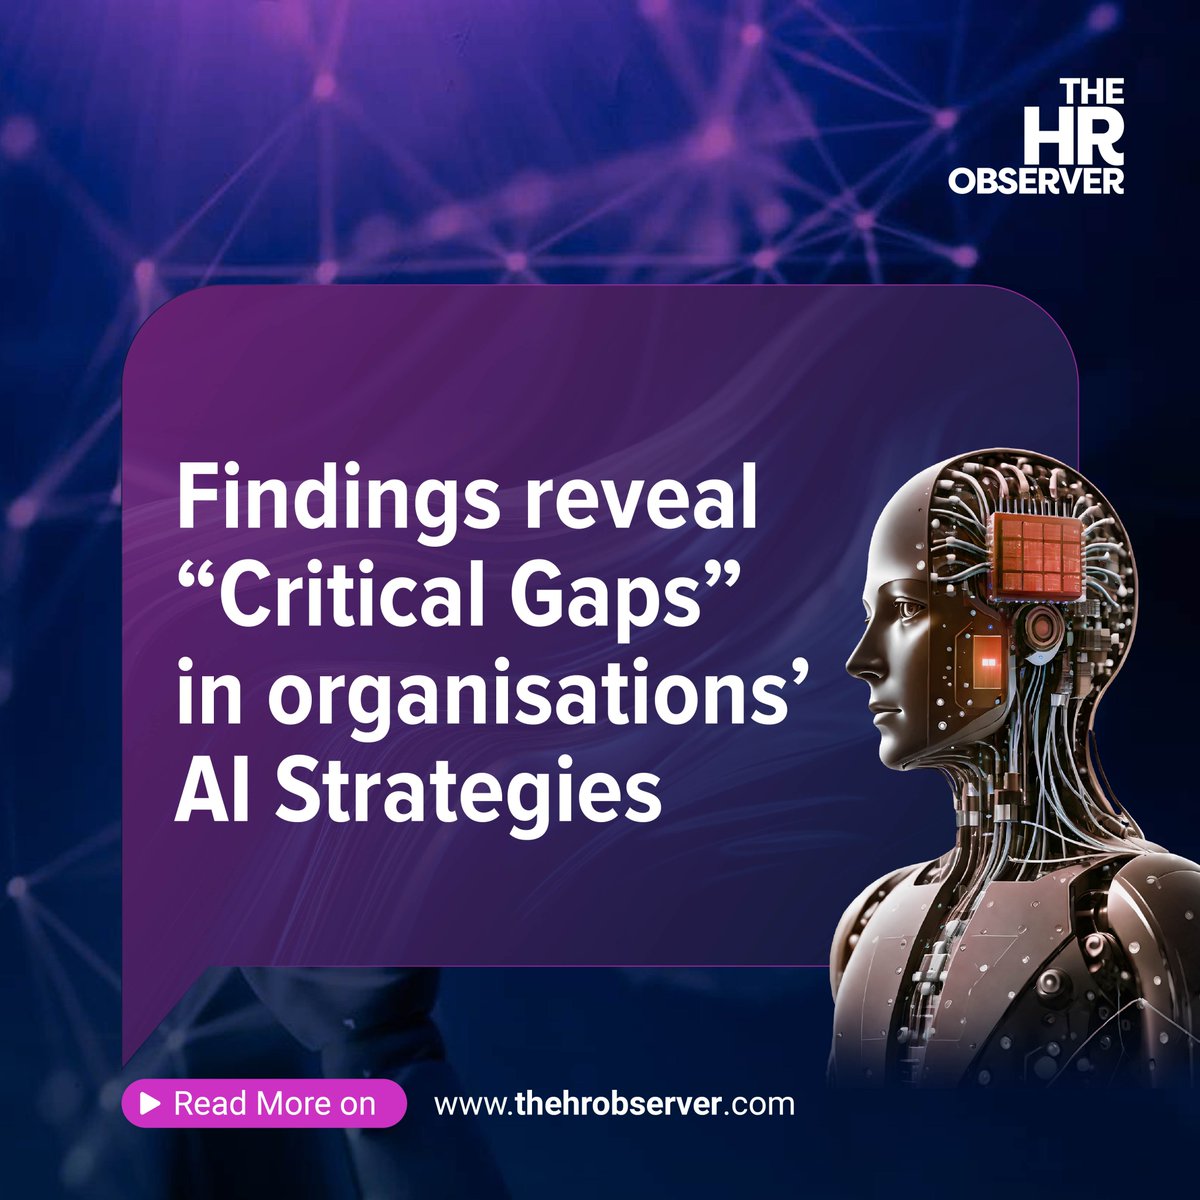 The new 'Architect an AI Advantage' report reveals critical gaps in AI readiness, from lack of data maturity to inadequate networking and computing power. Read this insightful article at bit.ly/3y4Wjmi #hrobserver #hrnews #artificialintelligence #aiatworkplace #hrnews